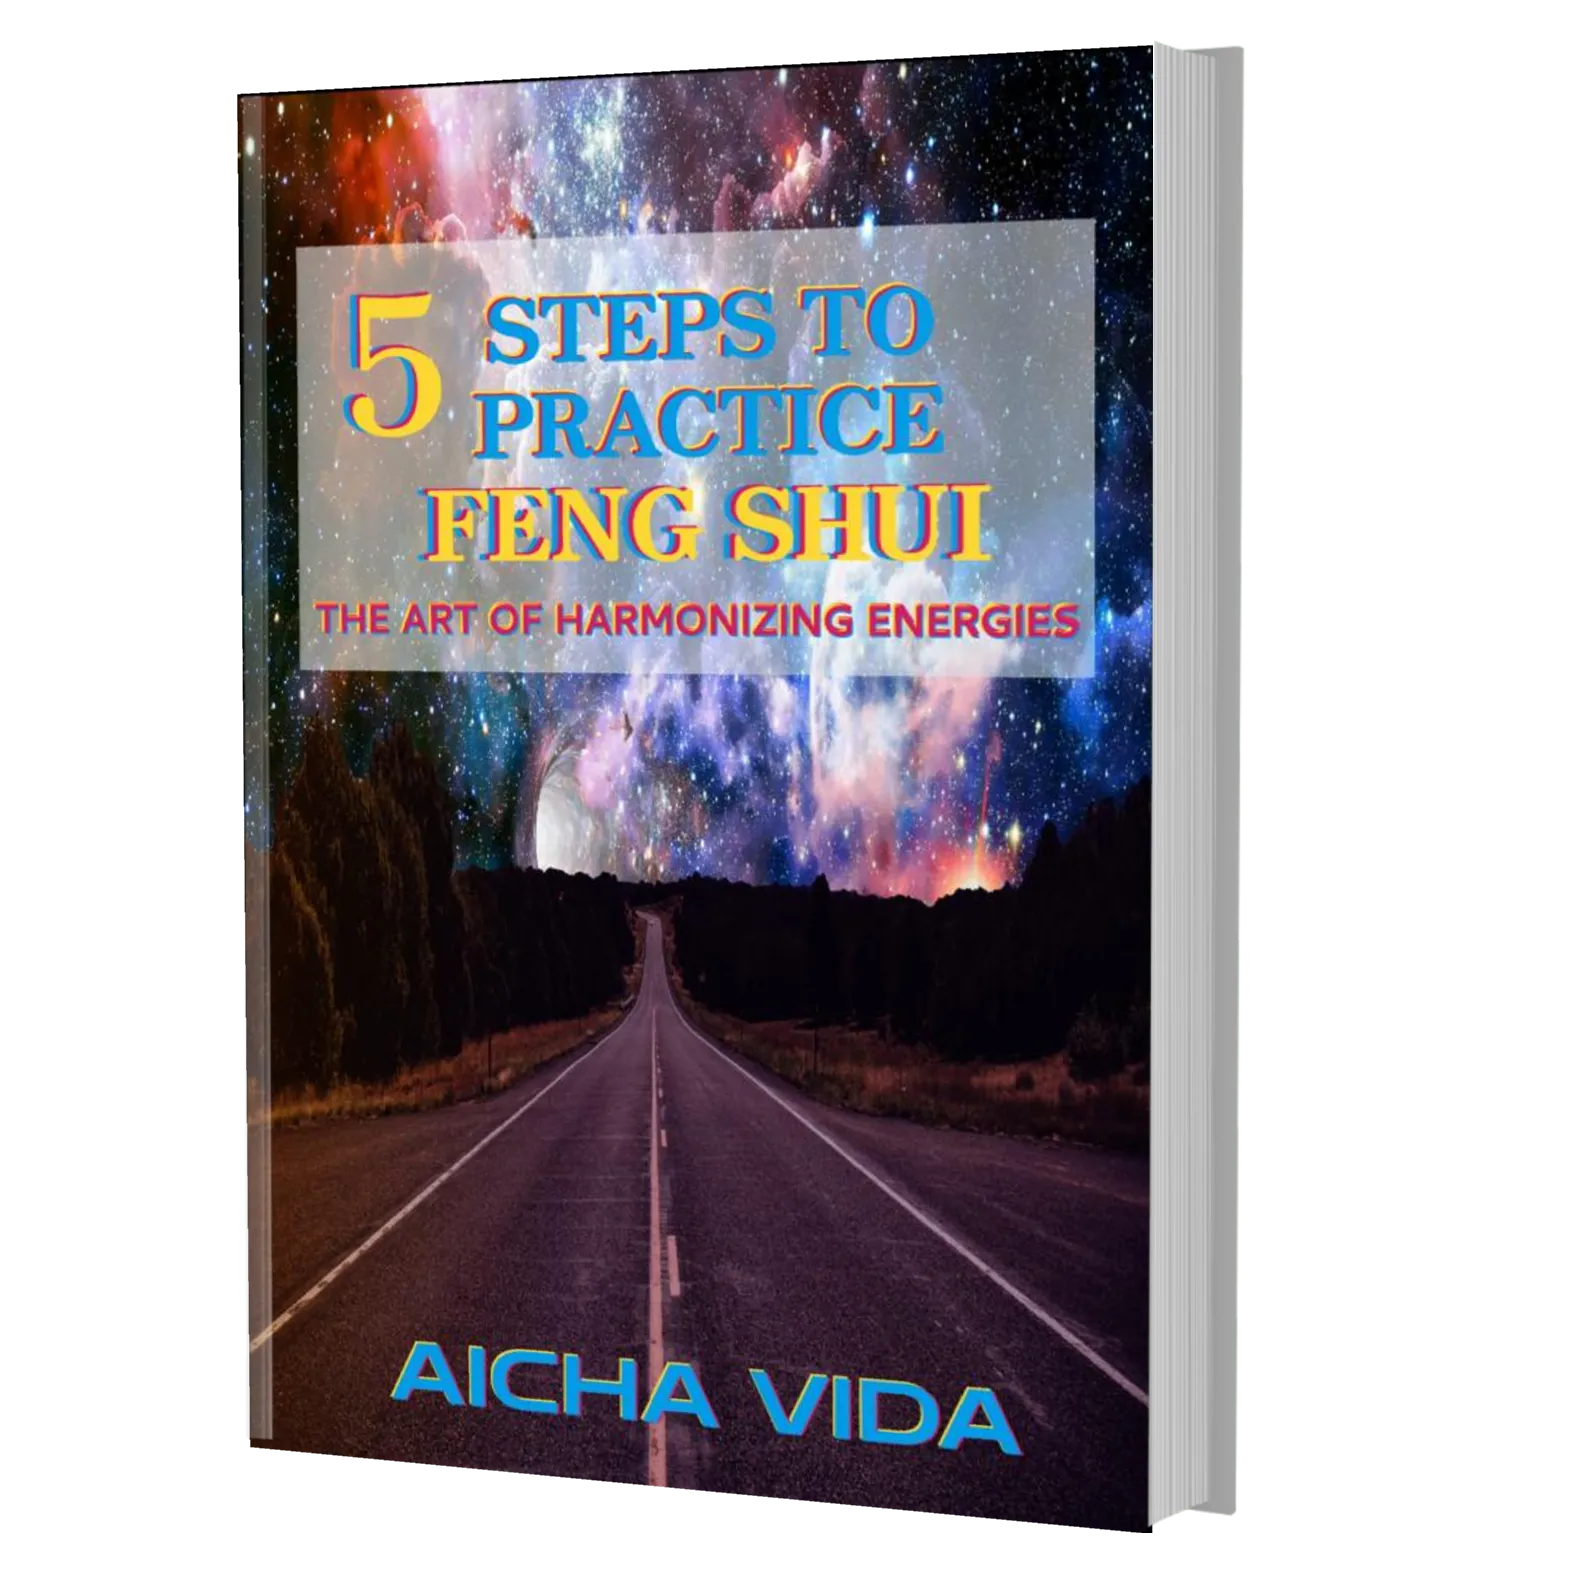 5 STEPS TO PRACTICE FENG SHUI